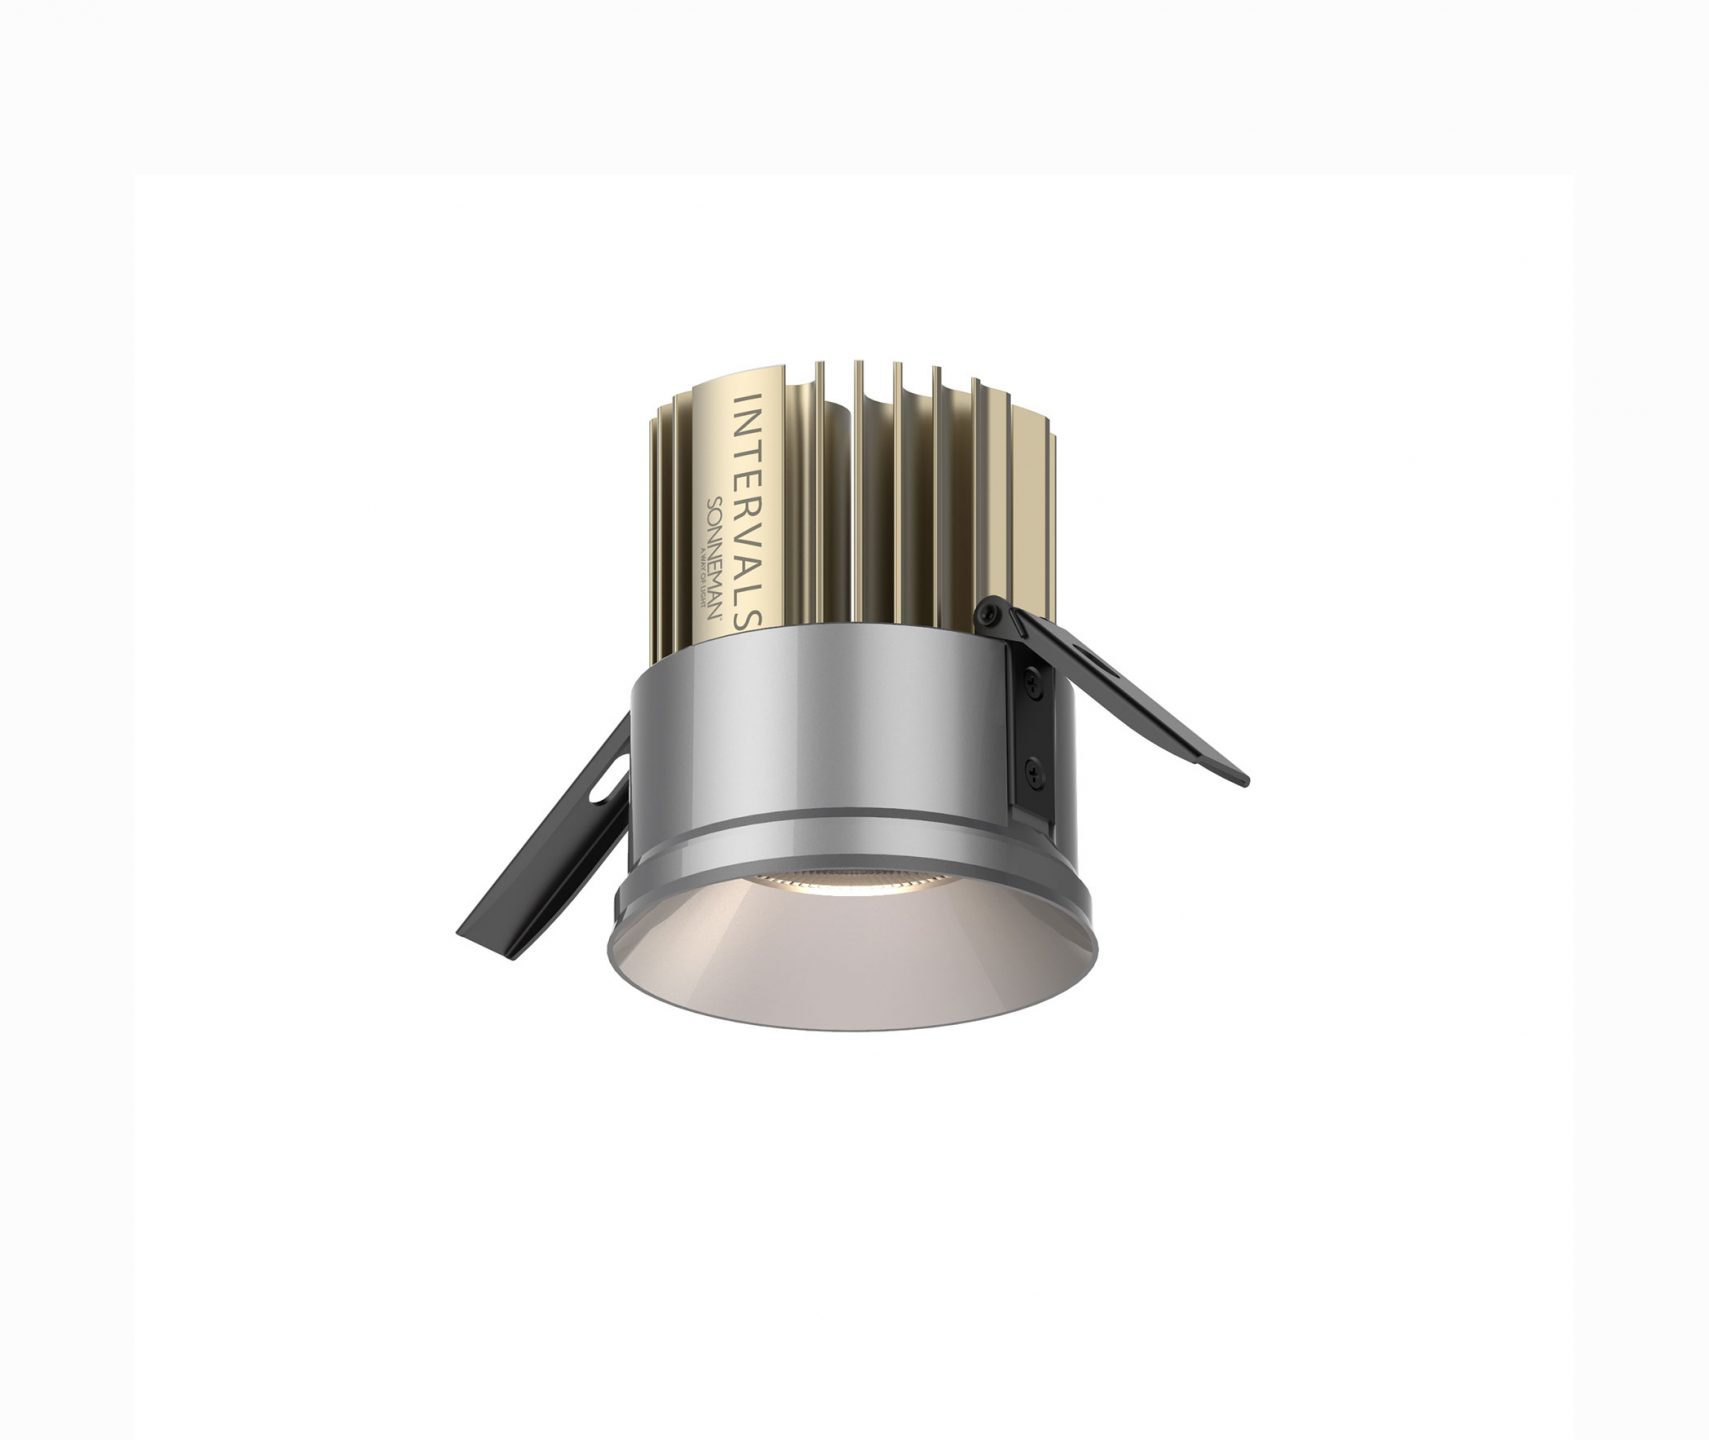 SONNEMAN_Intervals-Recessed-Downlights-Fixed-Round-Bevel-4_int_products